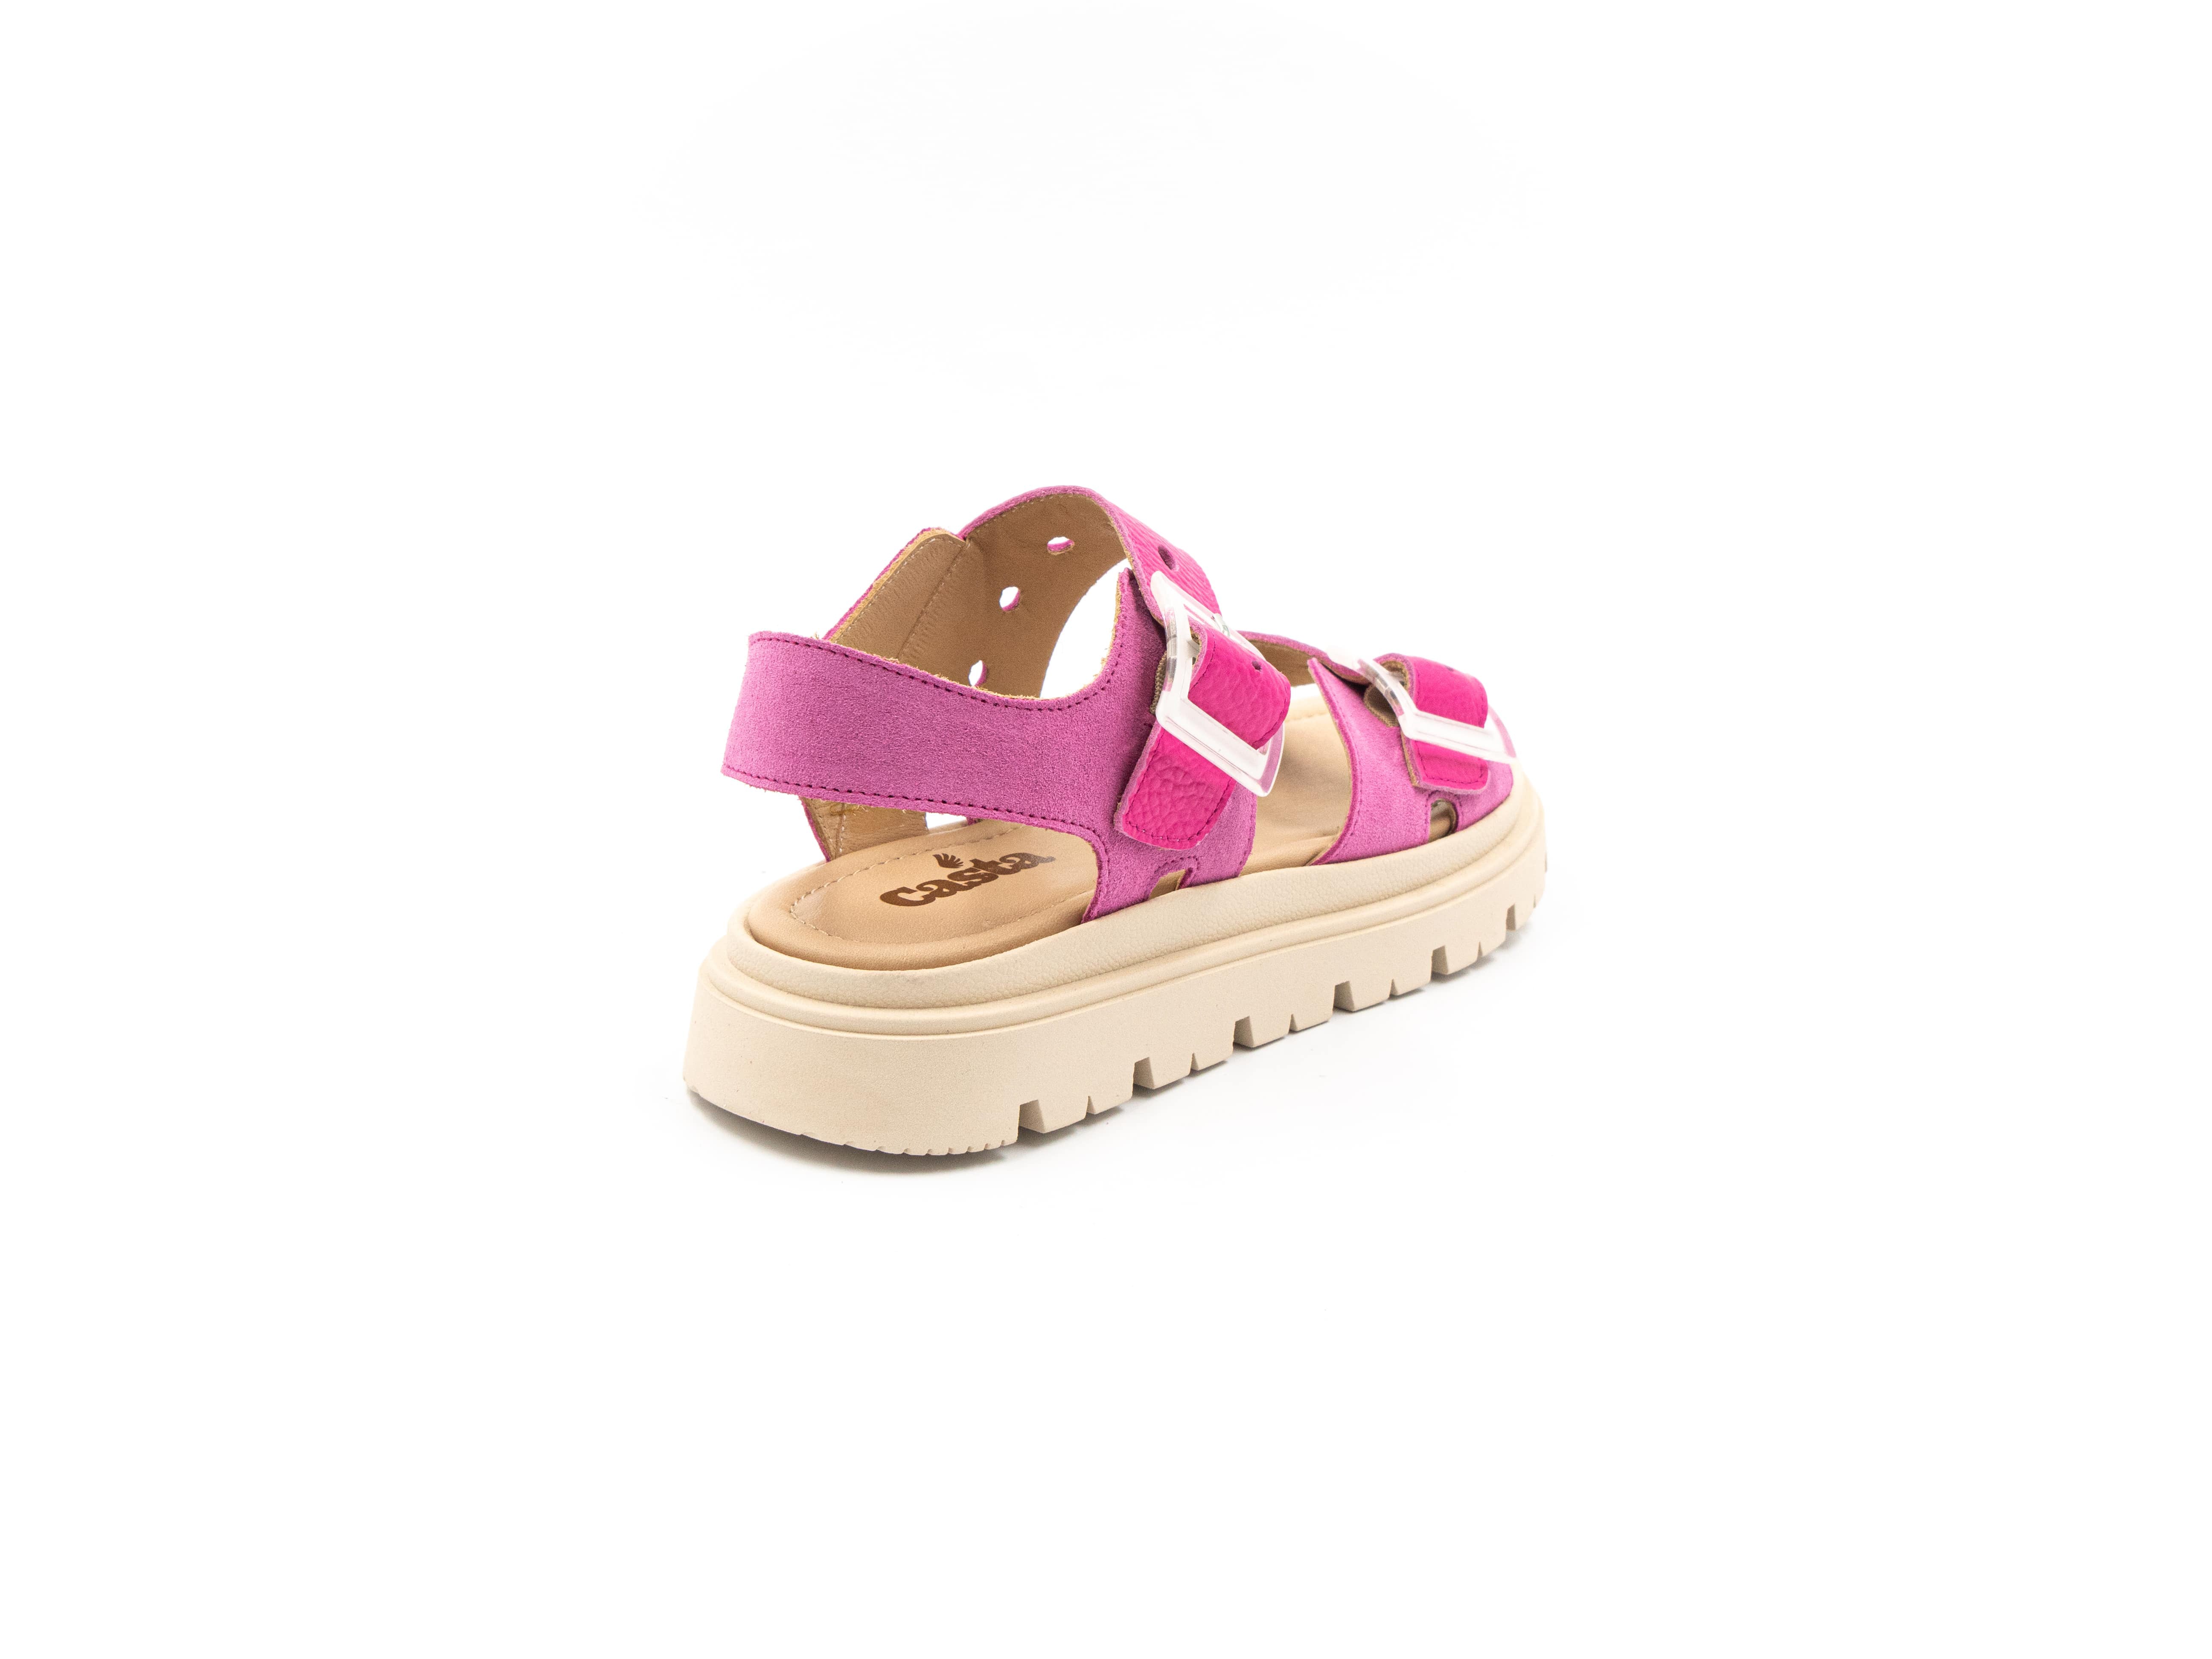 Flat sandals in shades of pink.